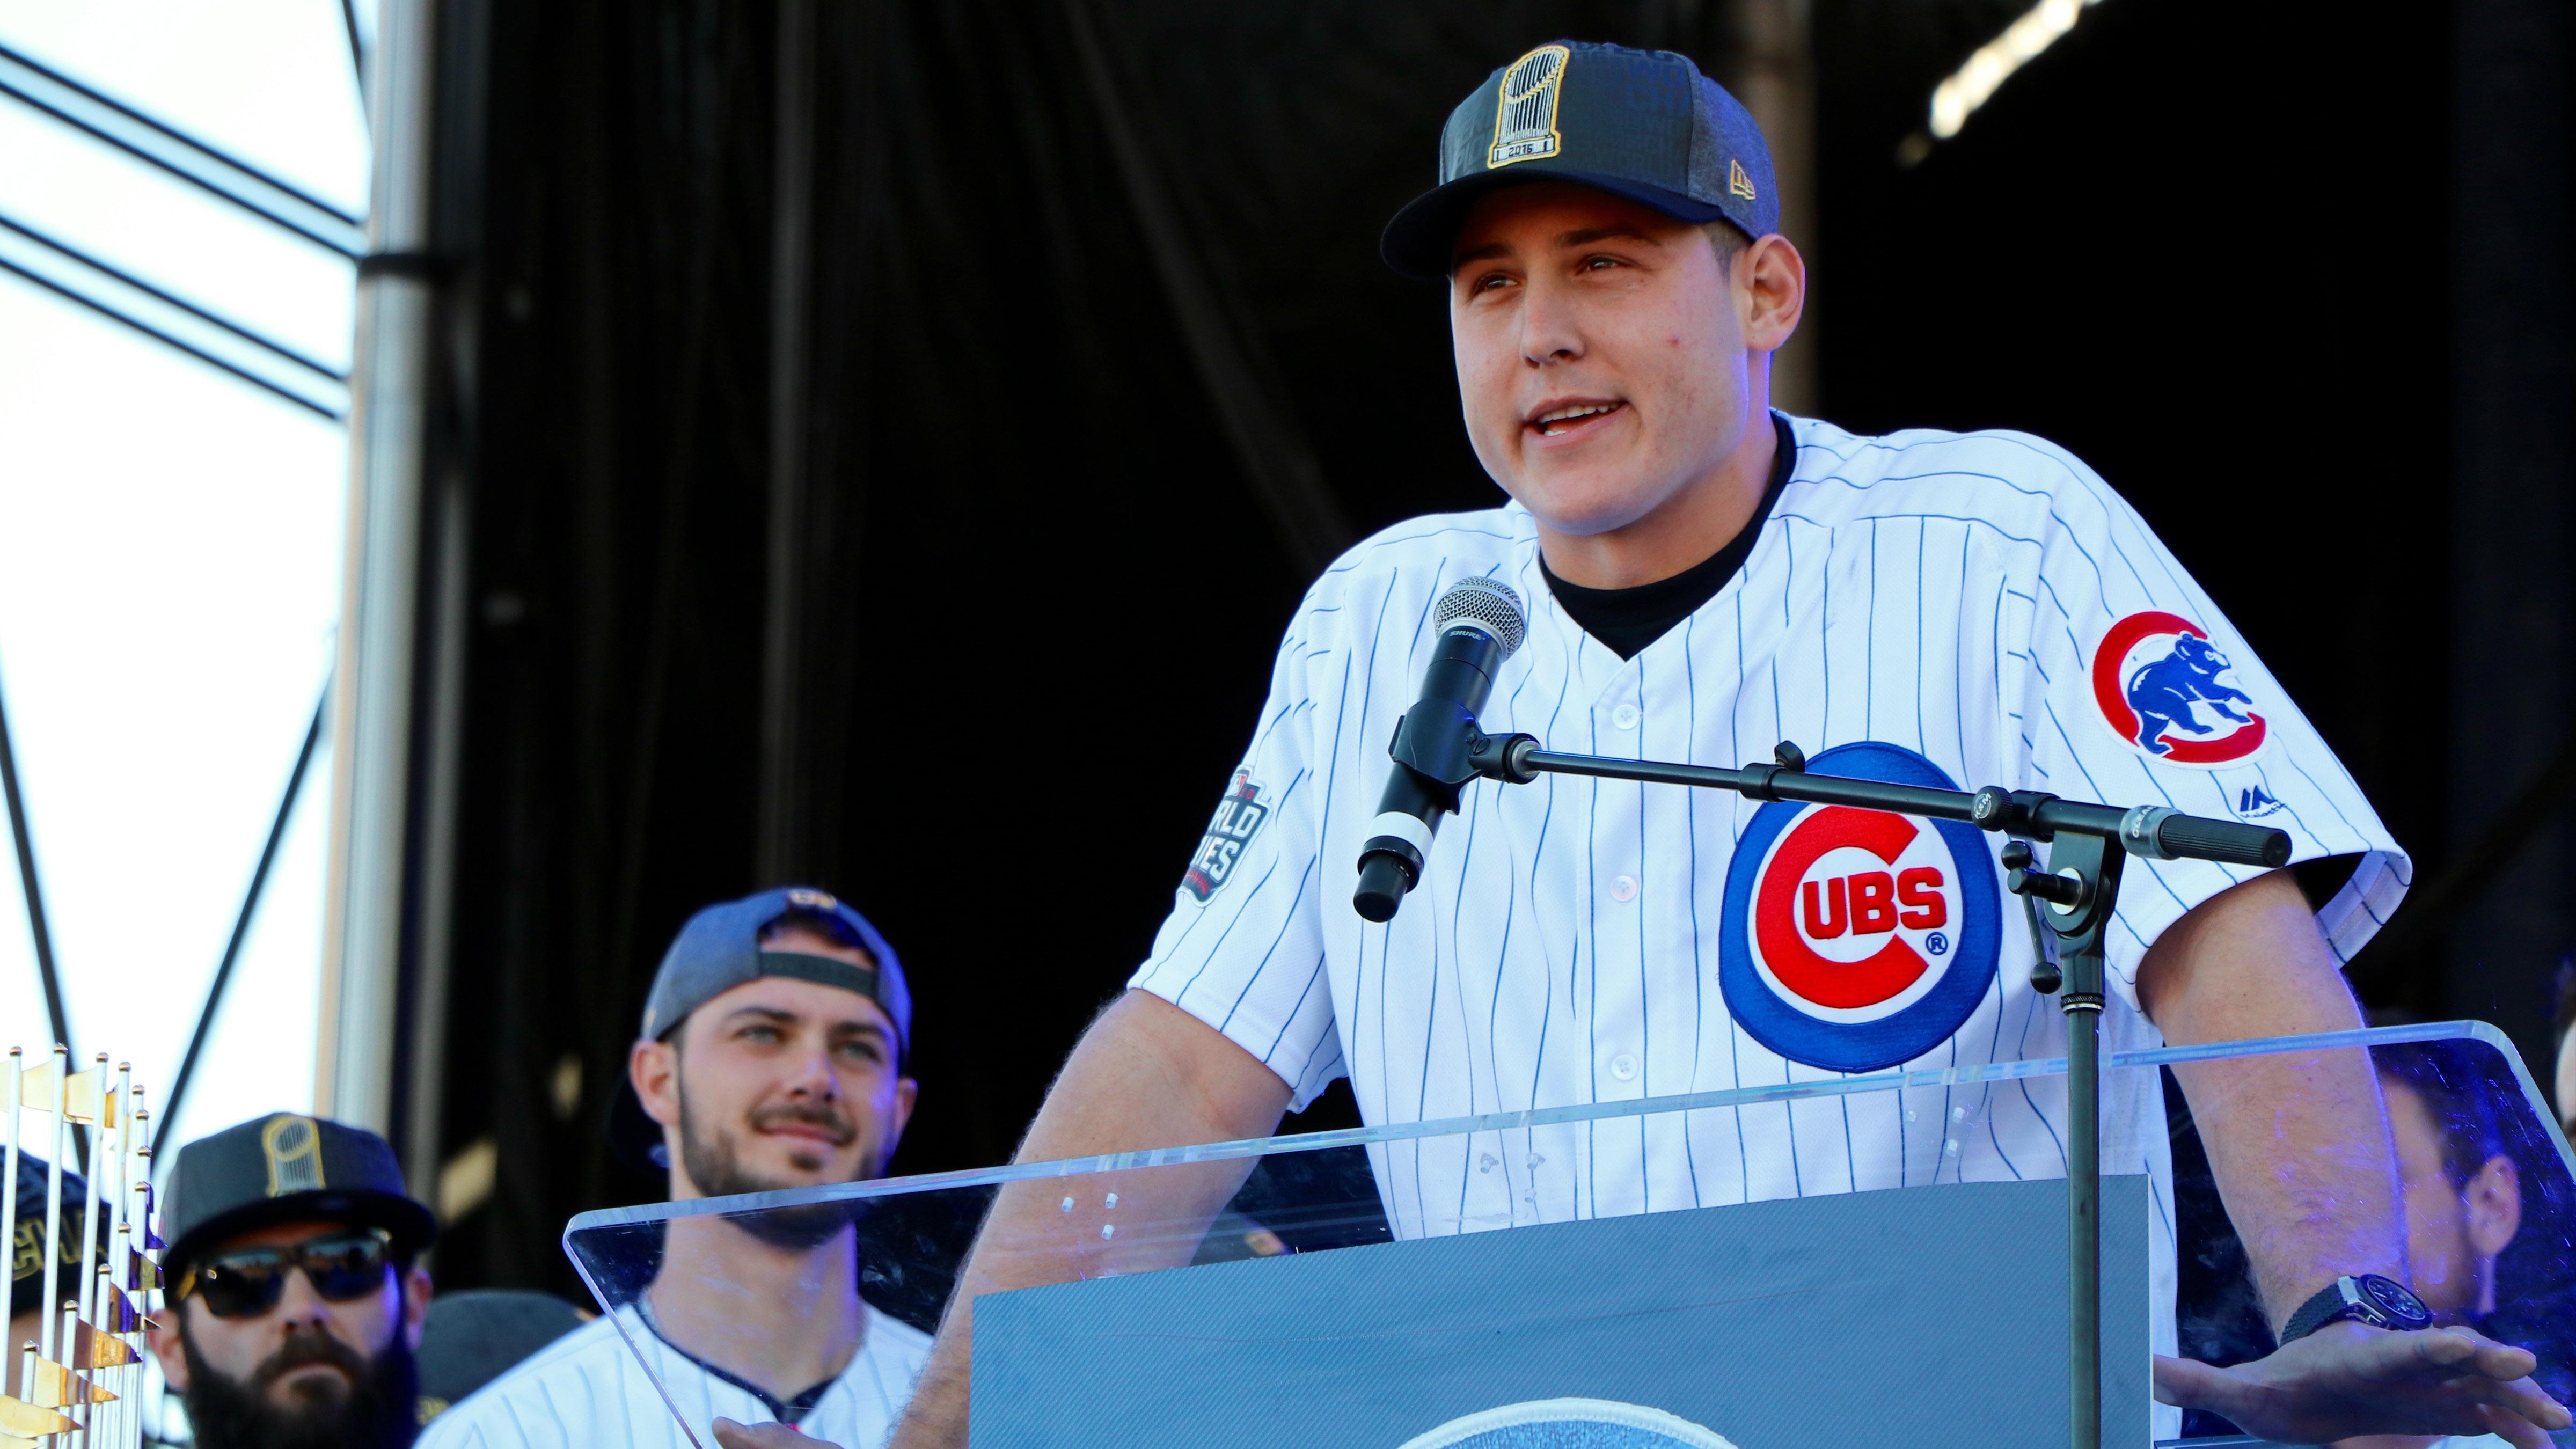 During the Cubs Con kids press conference, a young fan asked Anthony Rizzo  to be her valentine